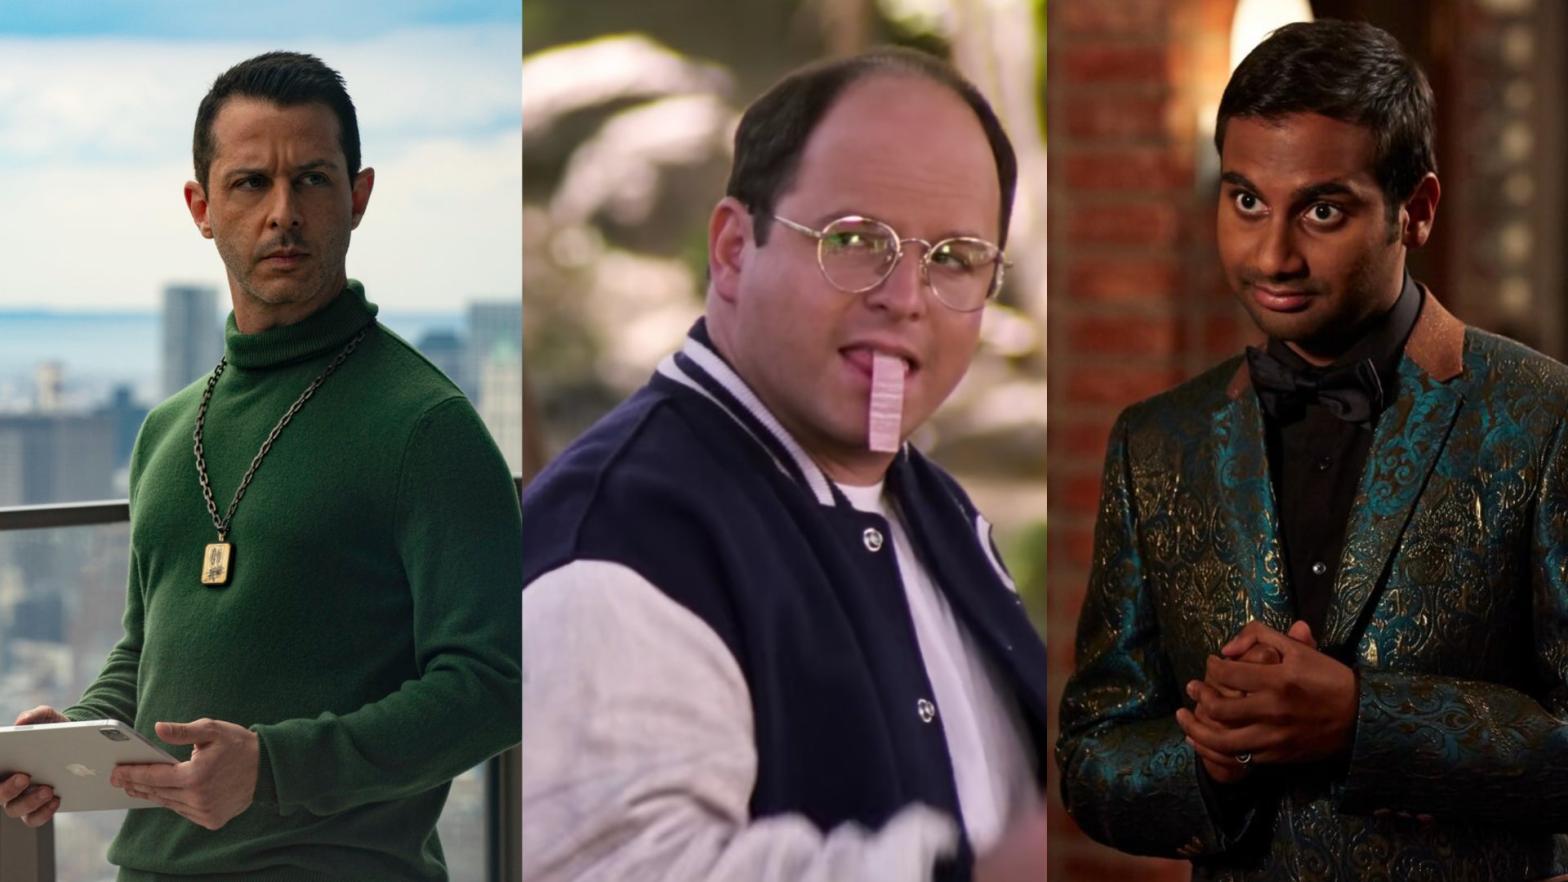 L-R: Kendall Roy from Succession, George Costanza from Seinfeld, and Tom Haverford from Parks & Rec (Image: HBO/Netflix/NBC)